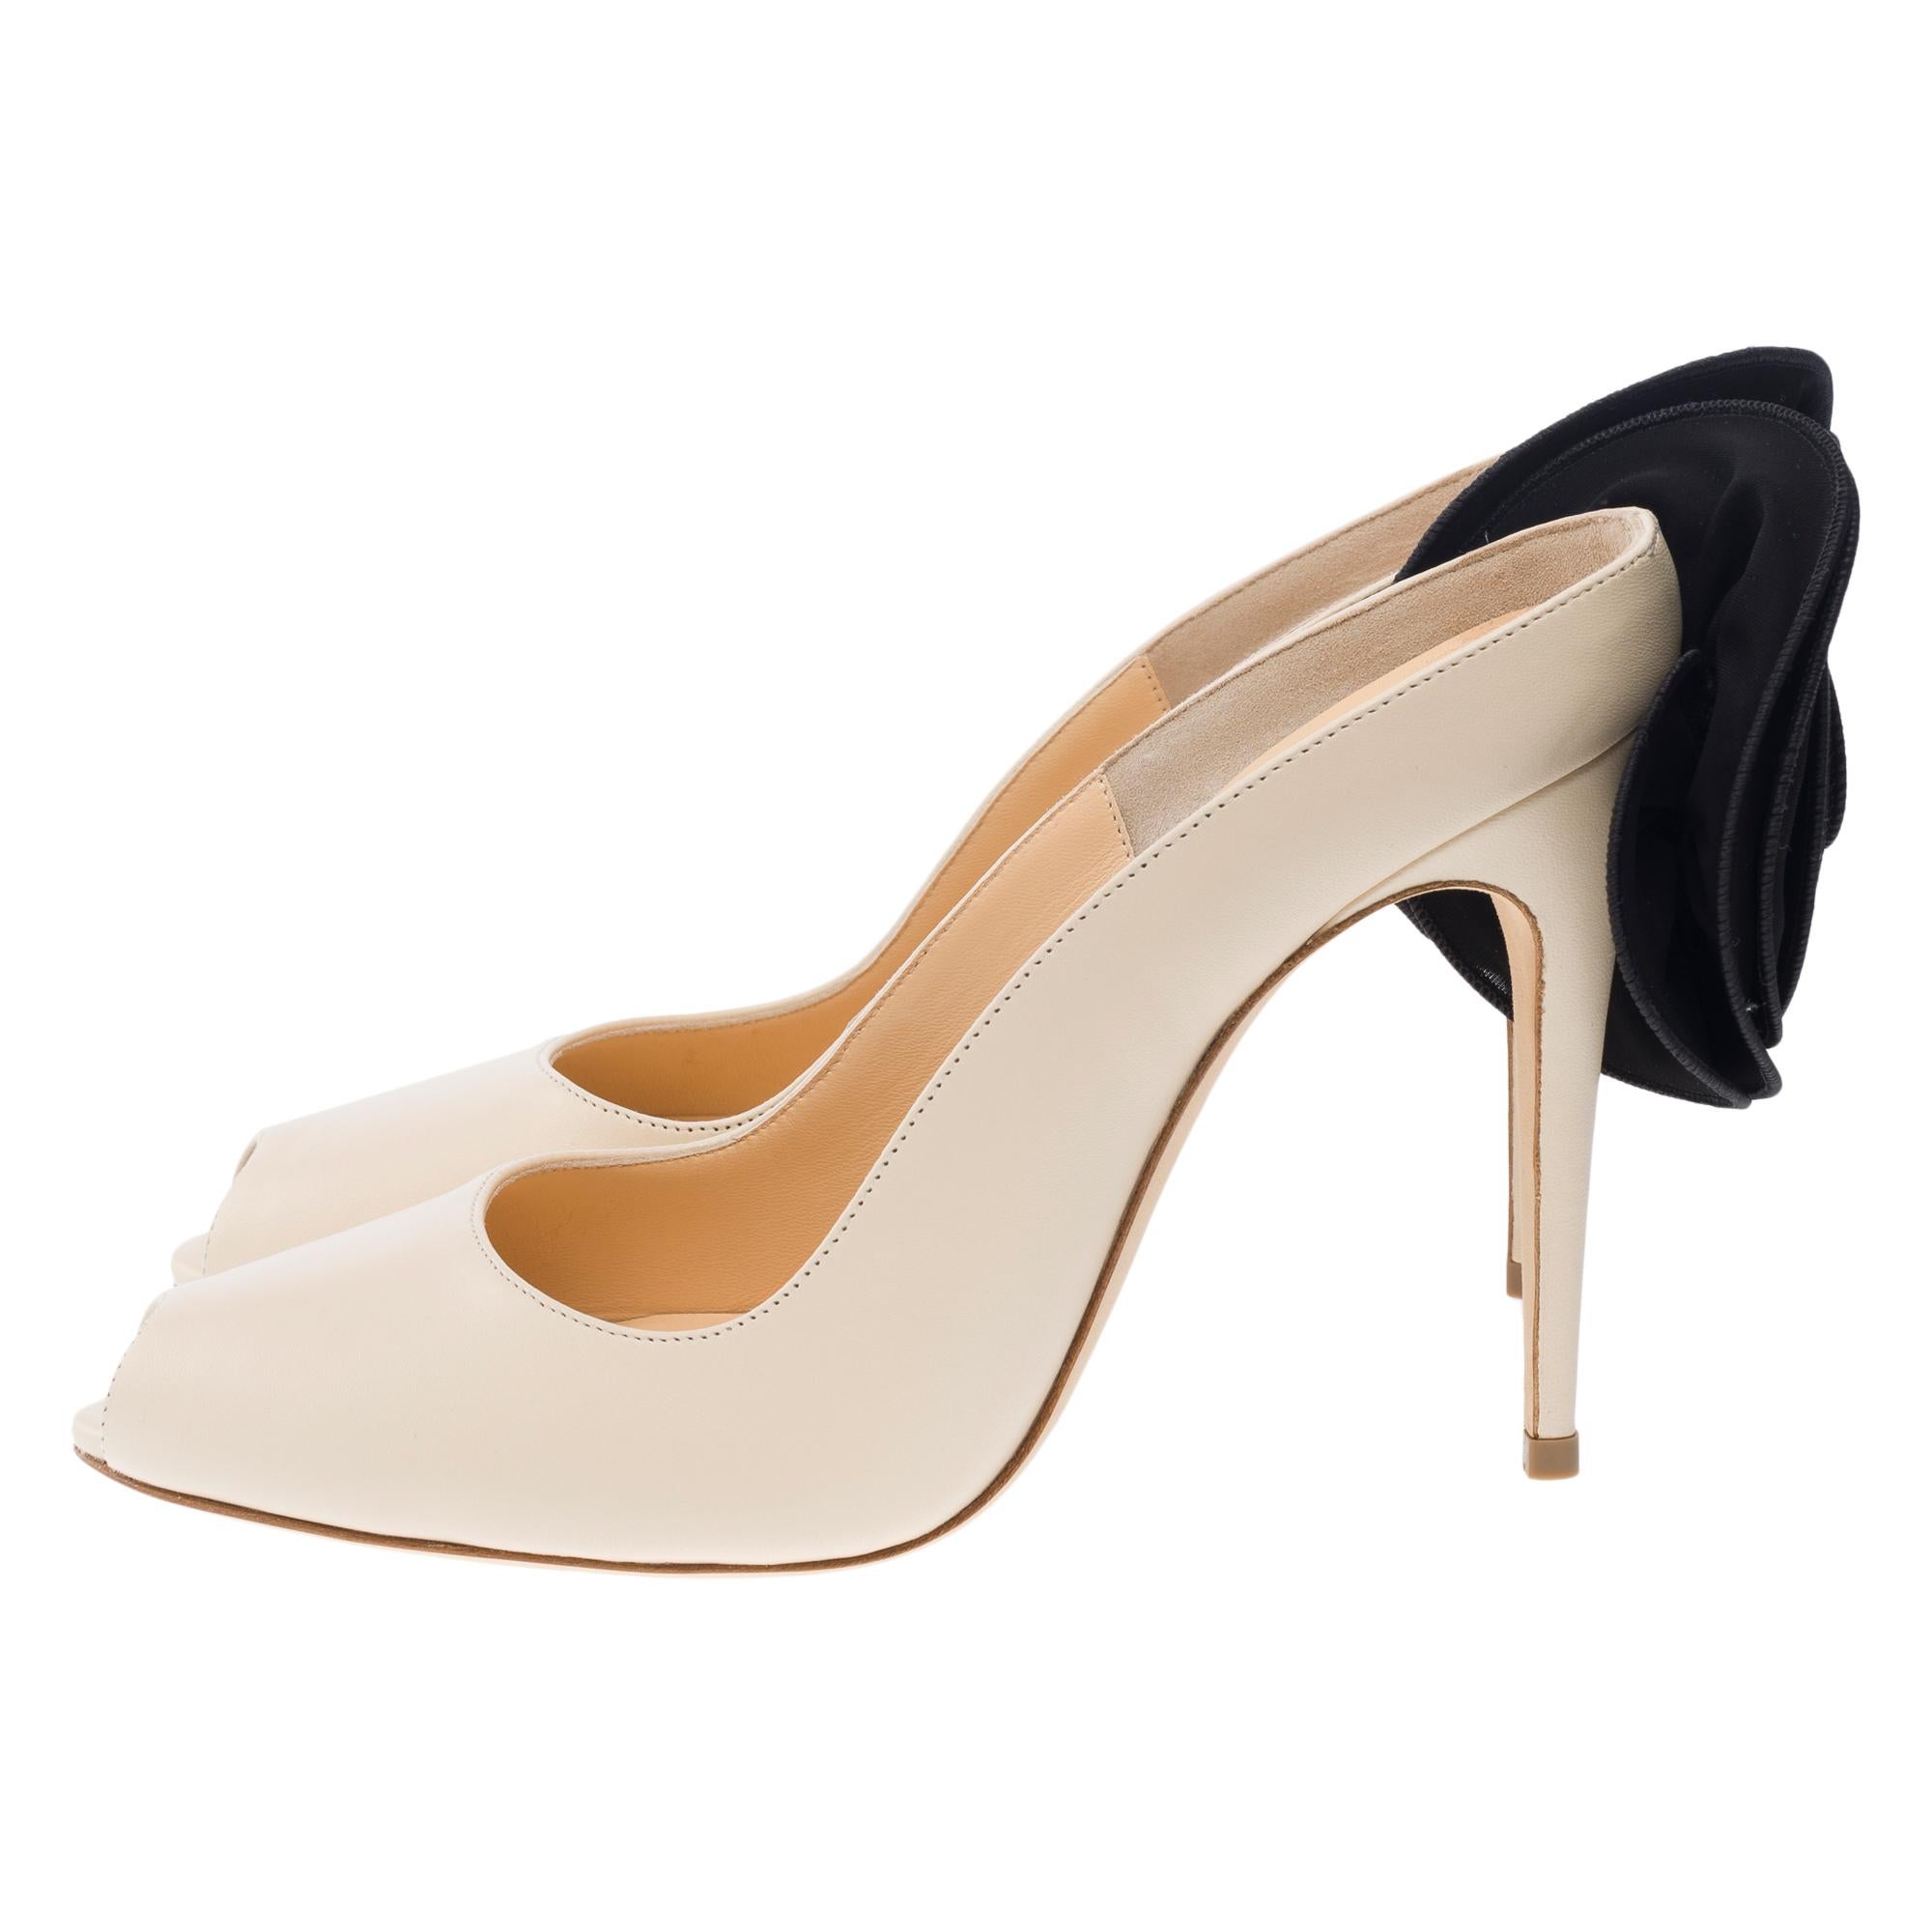 New Magda Butrym Peep Toe Mules in Cream leather , Size 38 For Sale 1